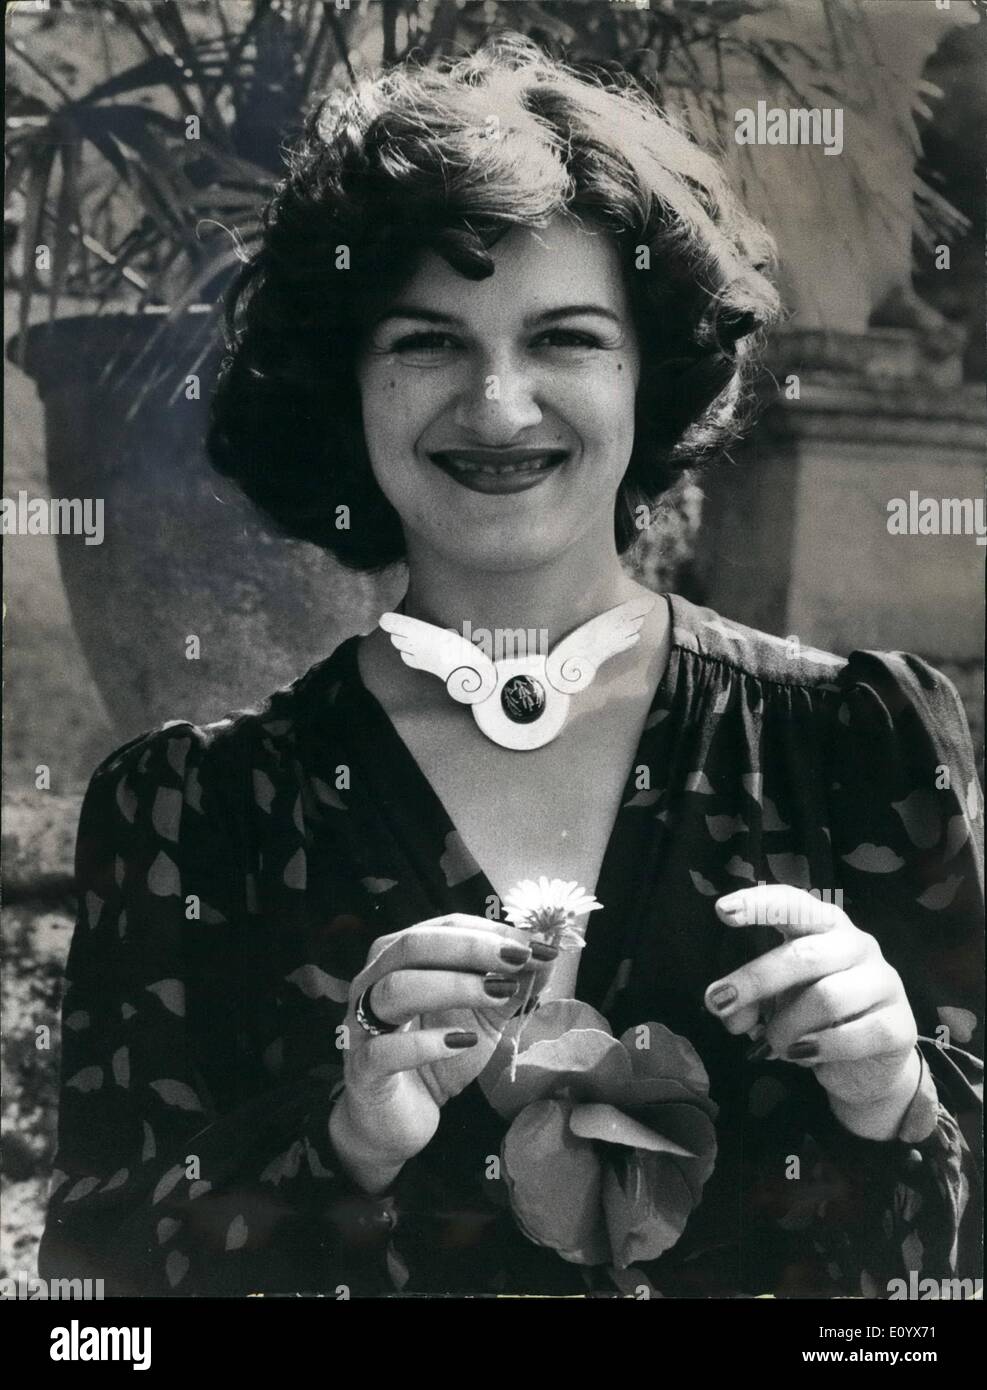 Sep. 09, 1971 - Paloma Picasso (22): The great painter's last child, her mother is the former common-law wife of Picasso's Francoise Gilot. Paloma lives with the Spanish sculptor of composit sculptures Miguel Berrocal. During her stay in Italy, she lives in the luxury villa Beroccal owns in the small town of Negrar, near Verona. Pablo Picasso and Paloma are estranged, she was unable to get along with Picasso's new wife Jacqueline Roque, Paloma is not allowed even to phone her father, and has been cut off completely. Stock Photo